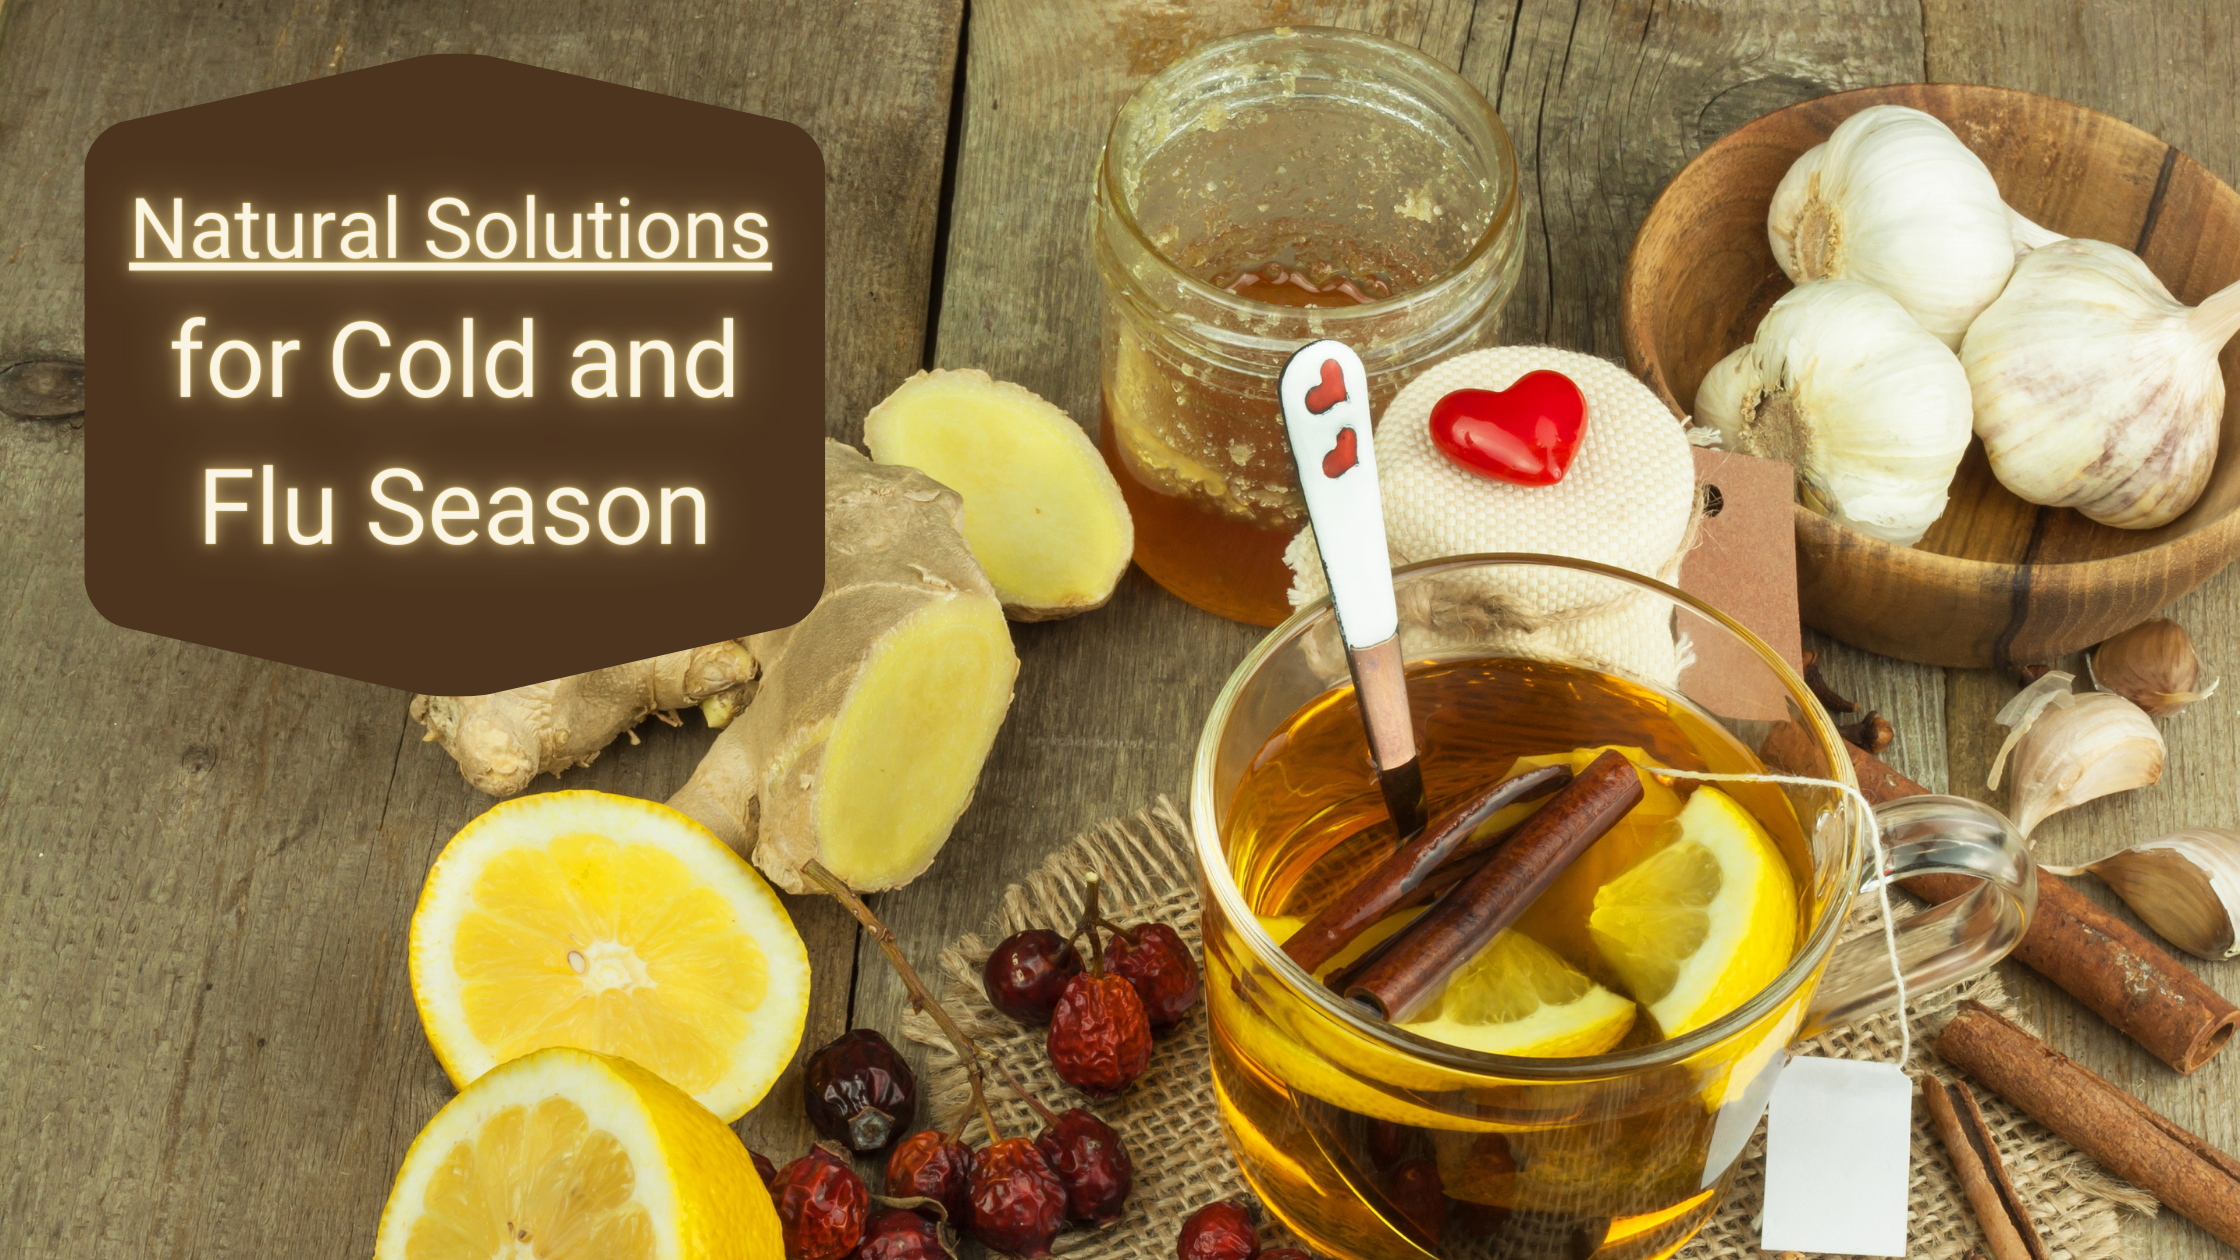 Natural Solutions for Cold and Flu Season